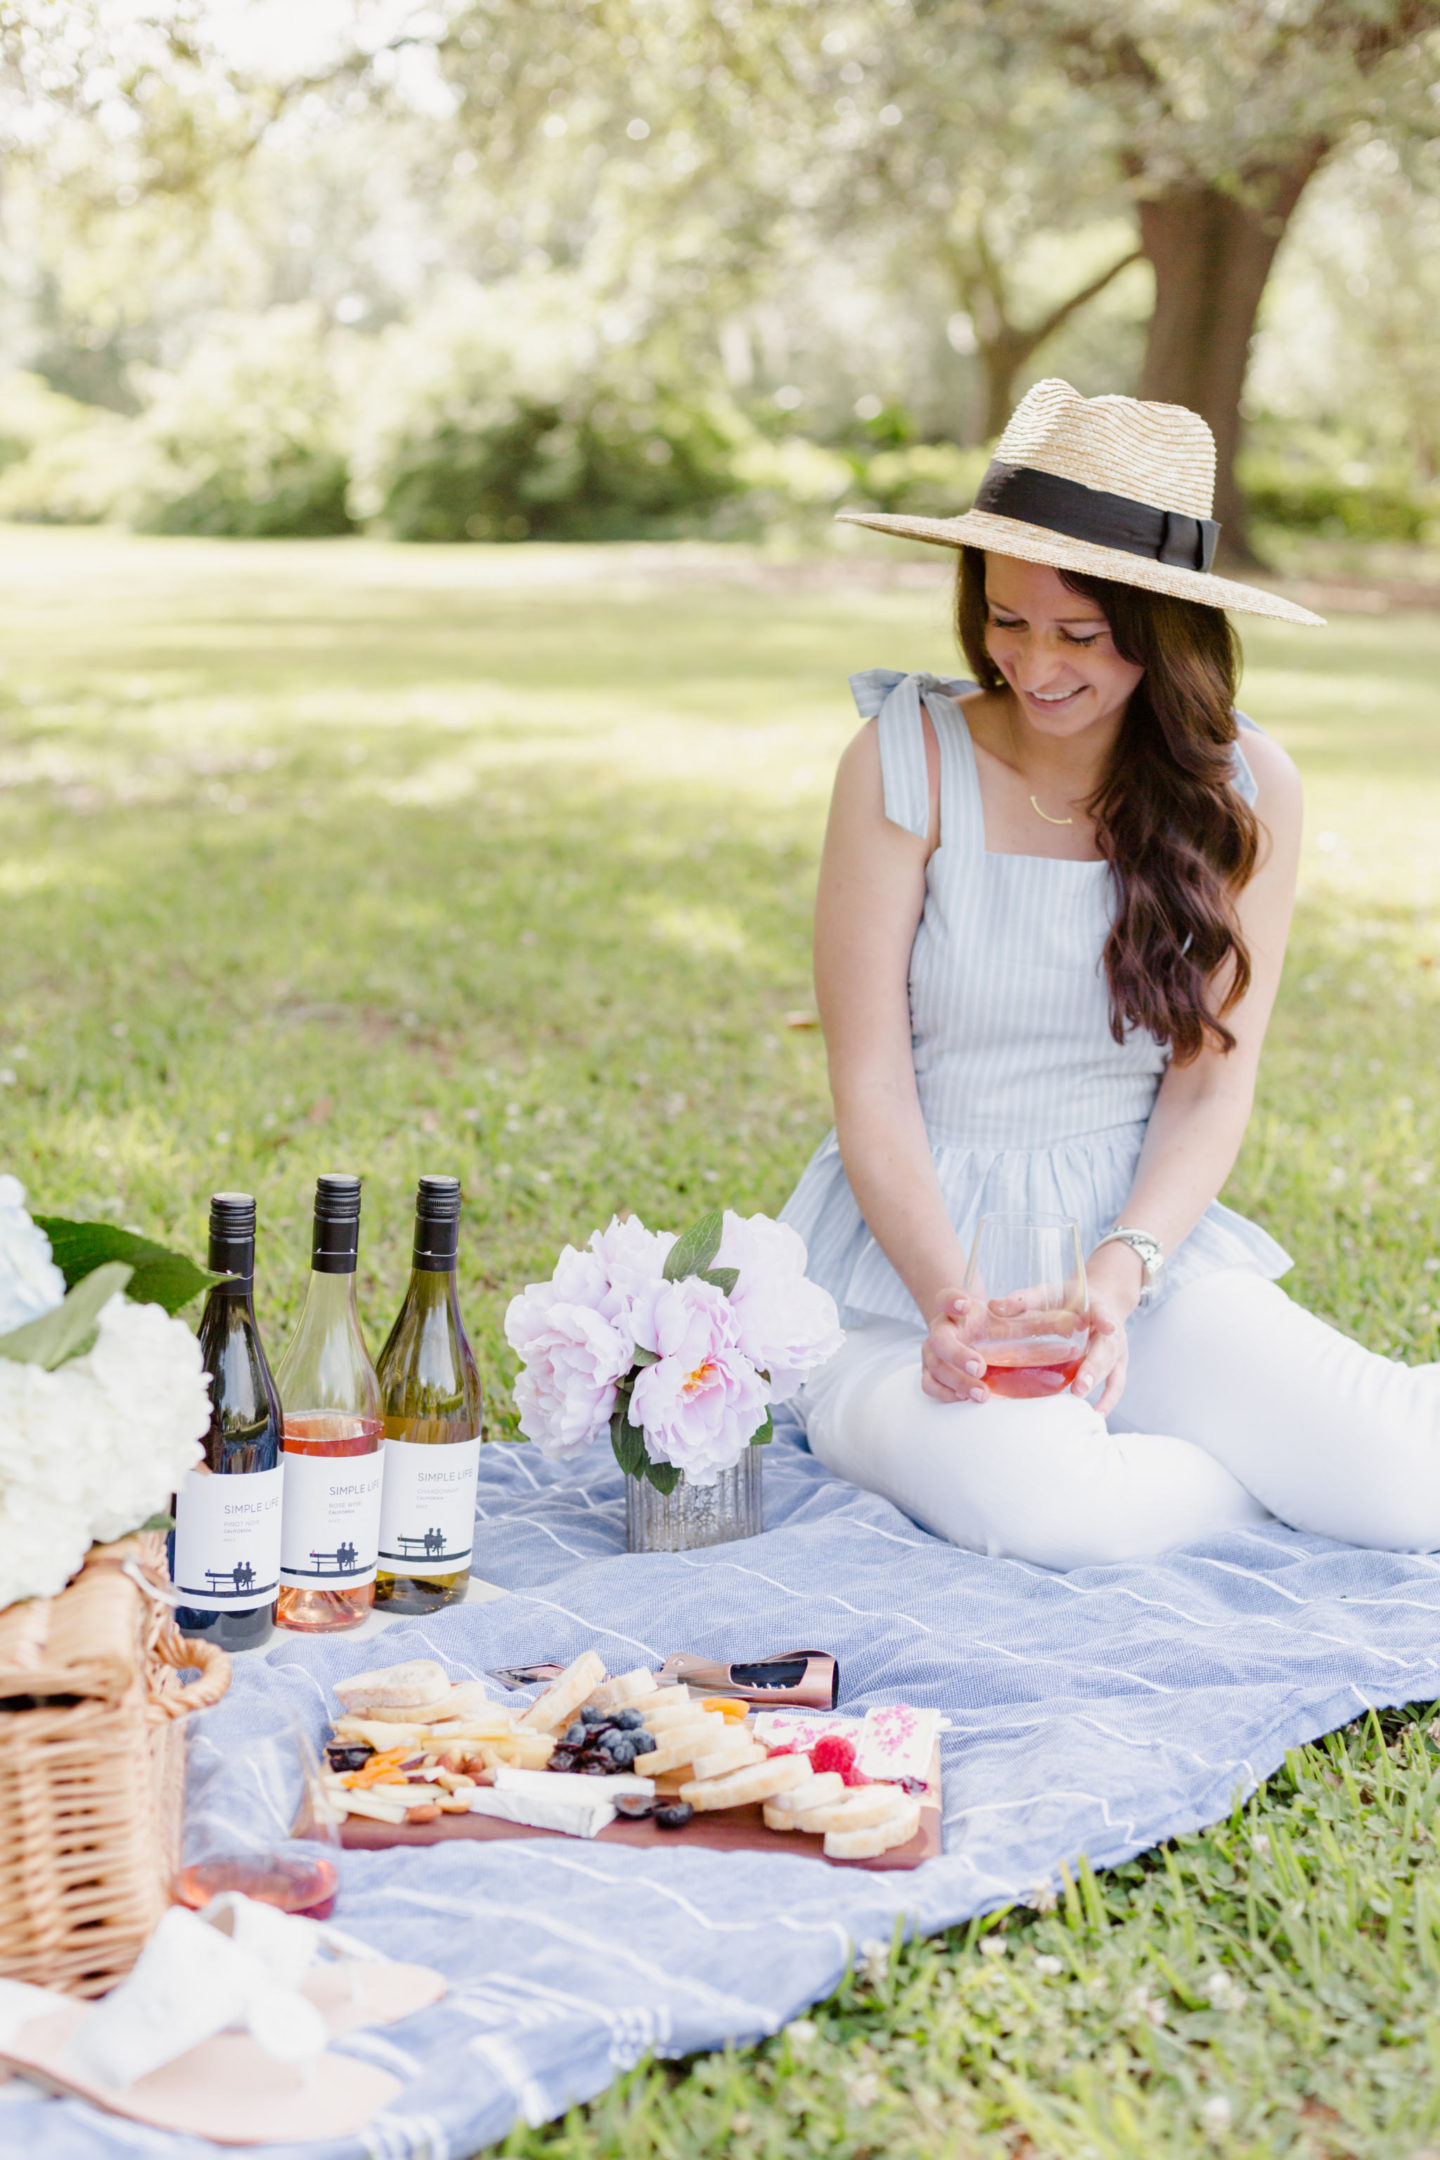 Picnic With Simple Life Wines